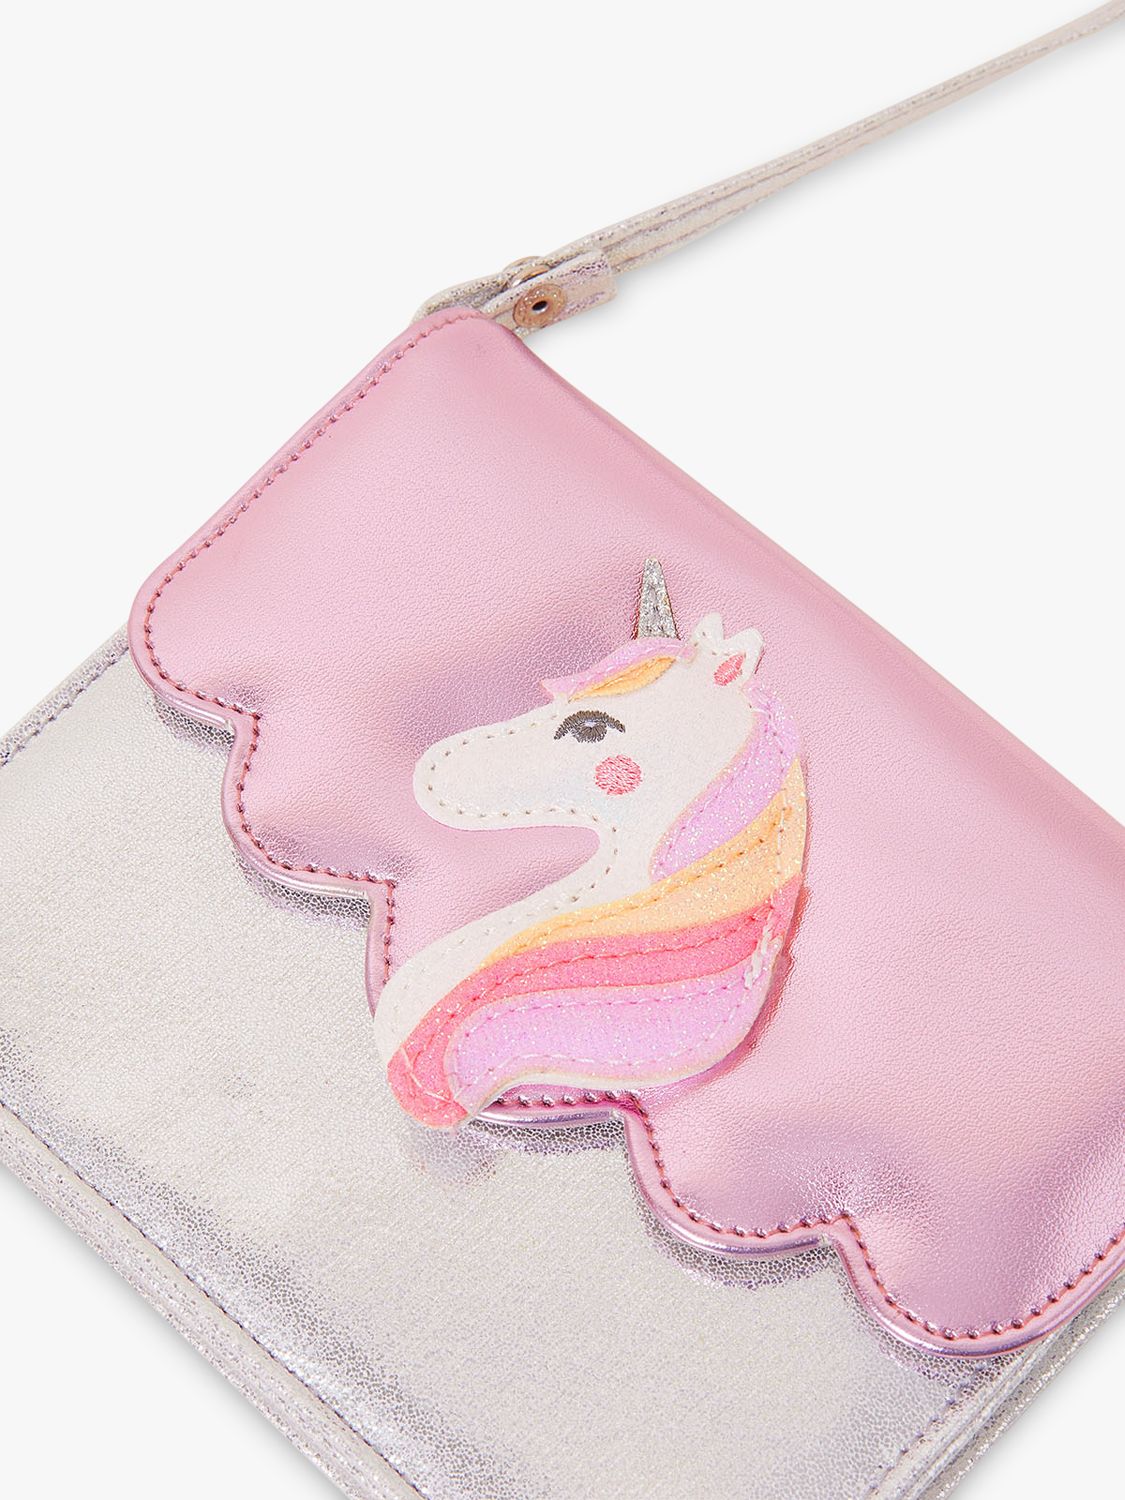 Buy Angels By Accessorize Unicorn Cross Body Bag, Silver Online at johnlewis.com